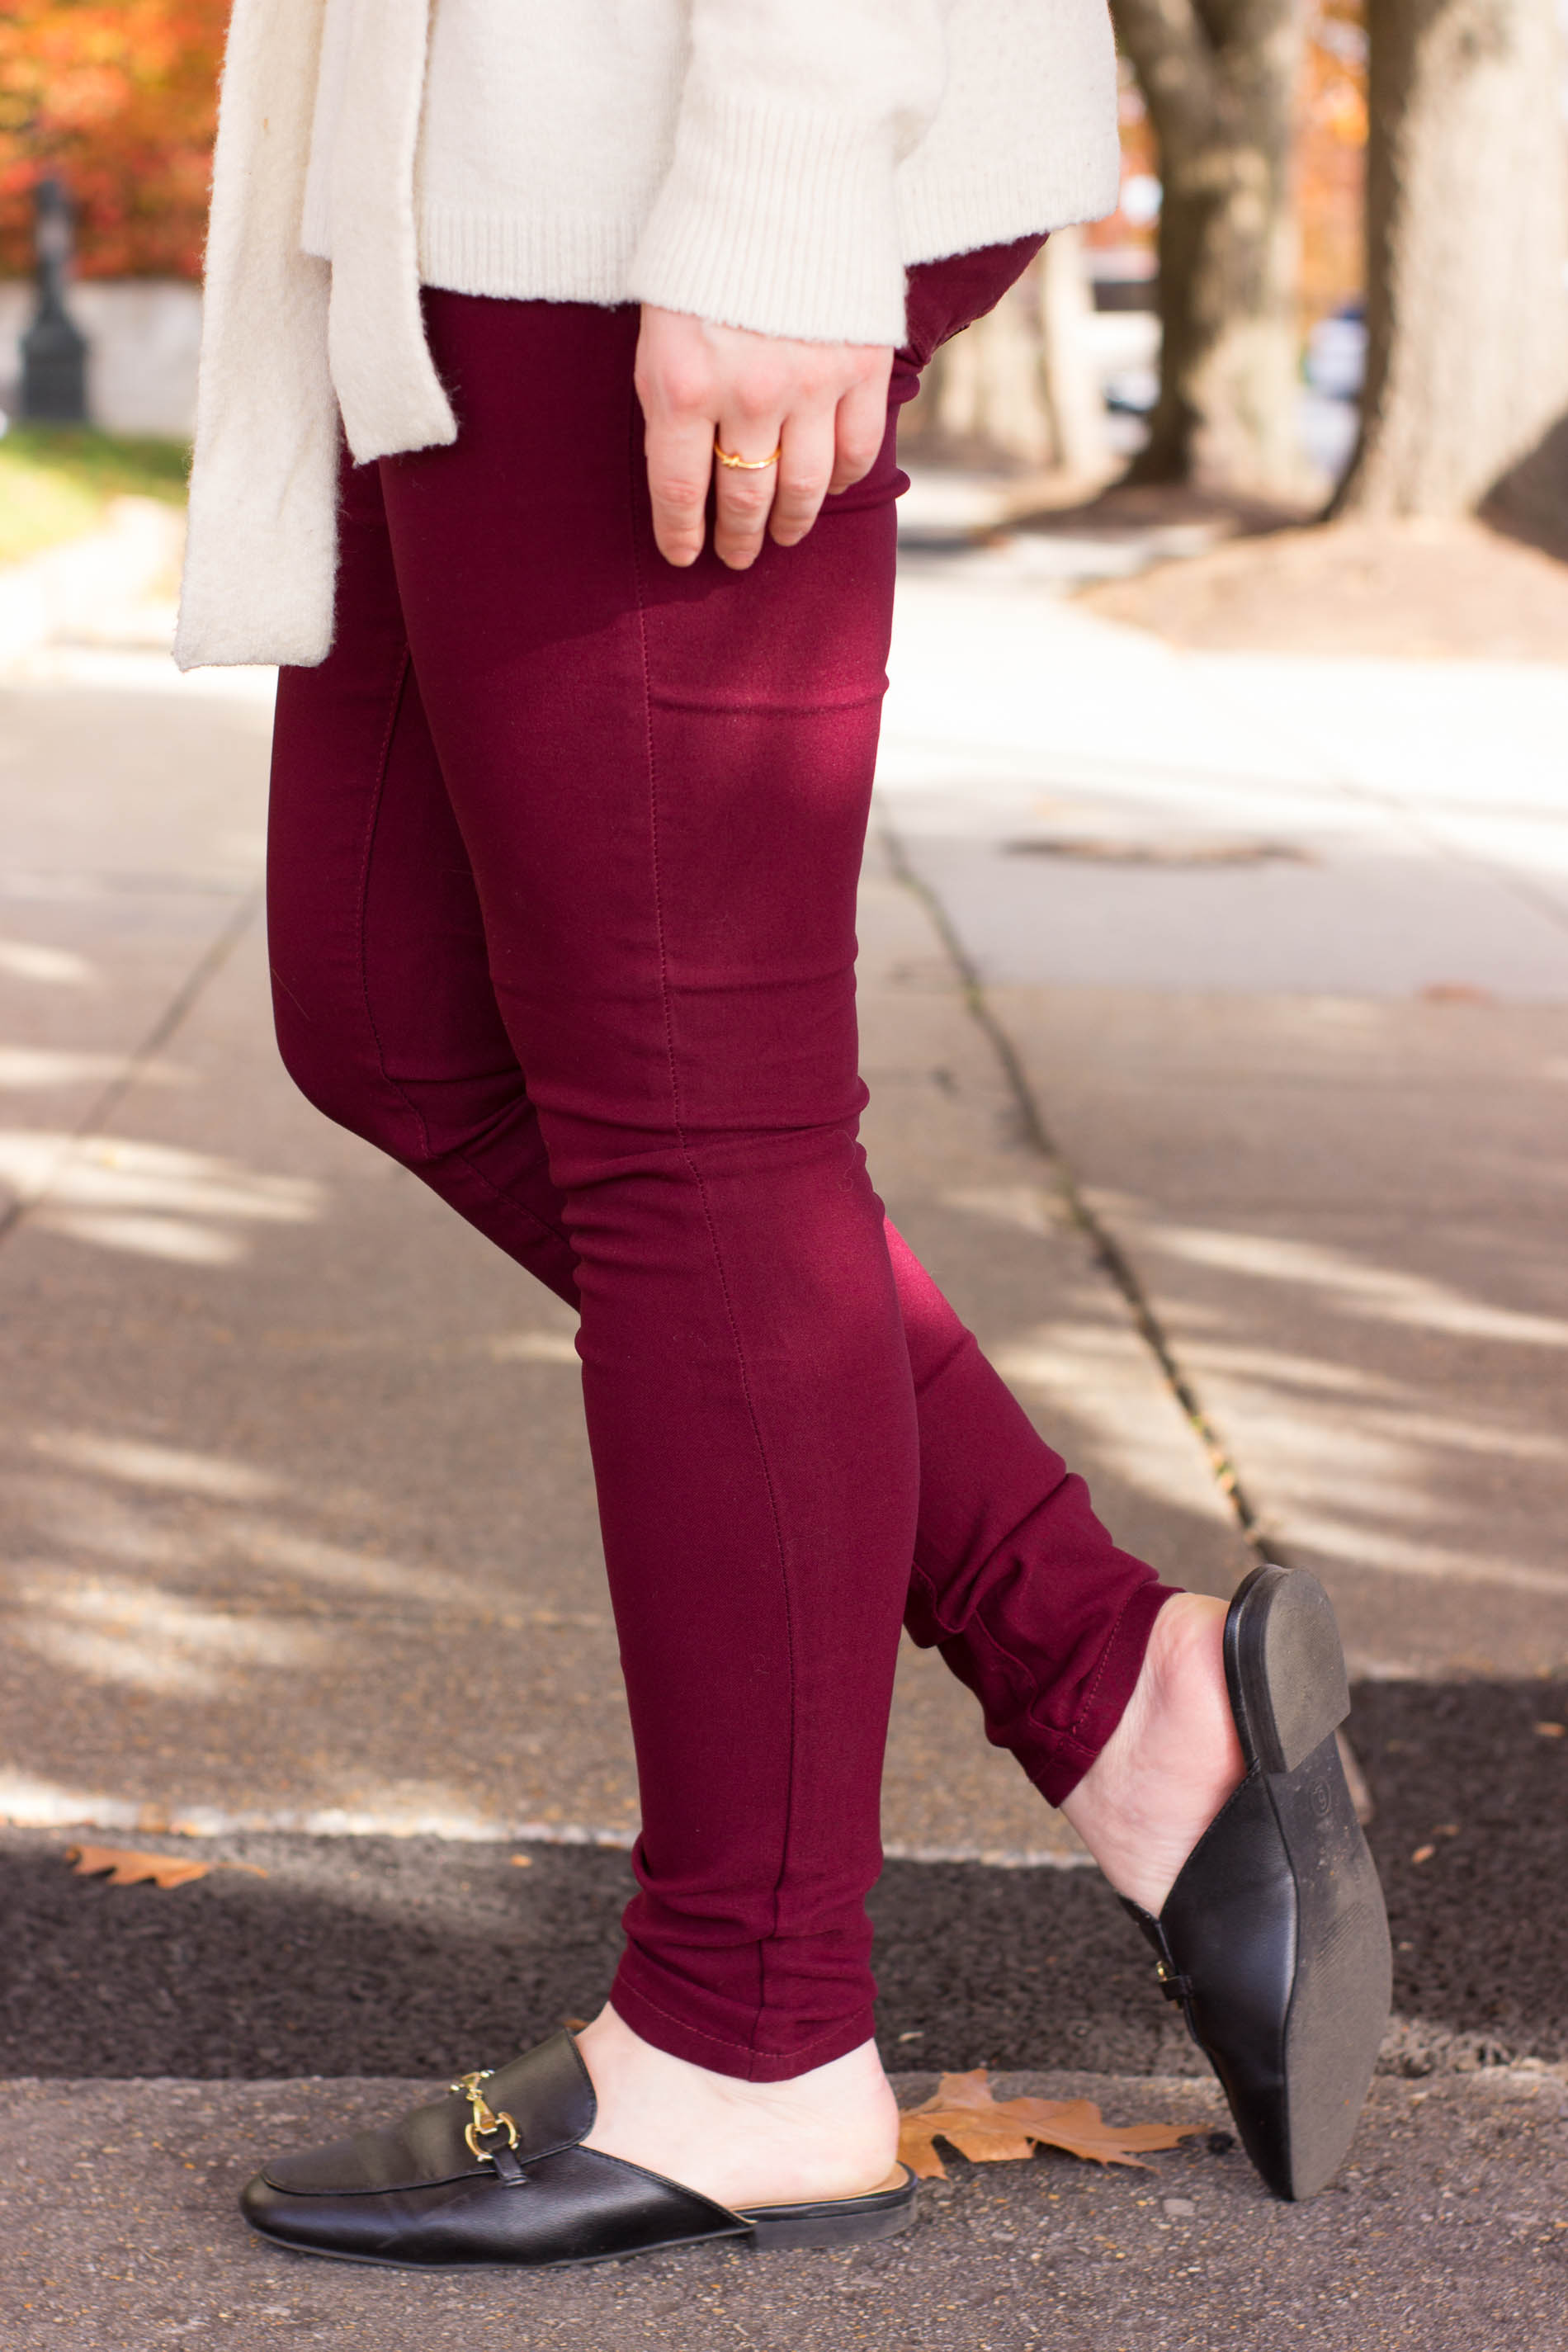 The Red Jeans | Something Good, @danaerinw , burgundy jeans, black mules, target kona loafers